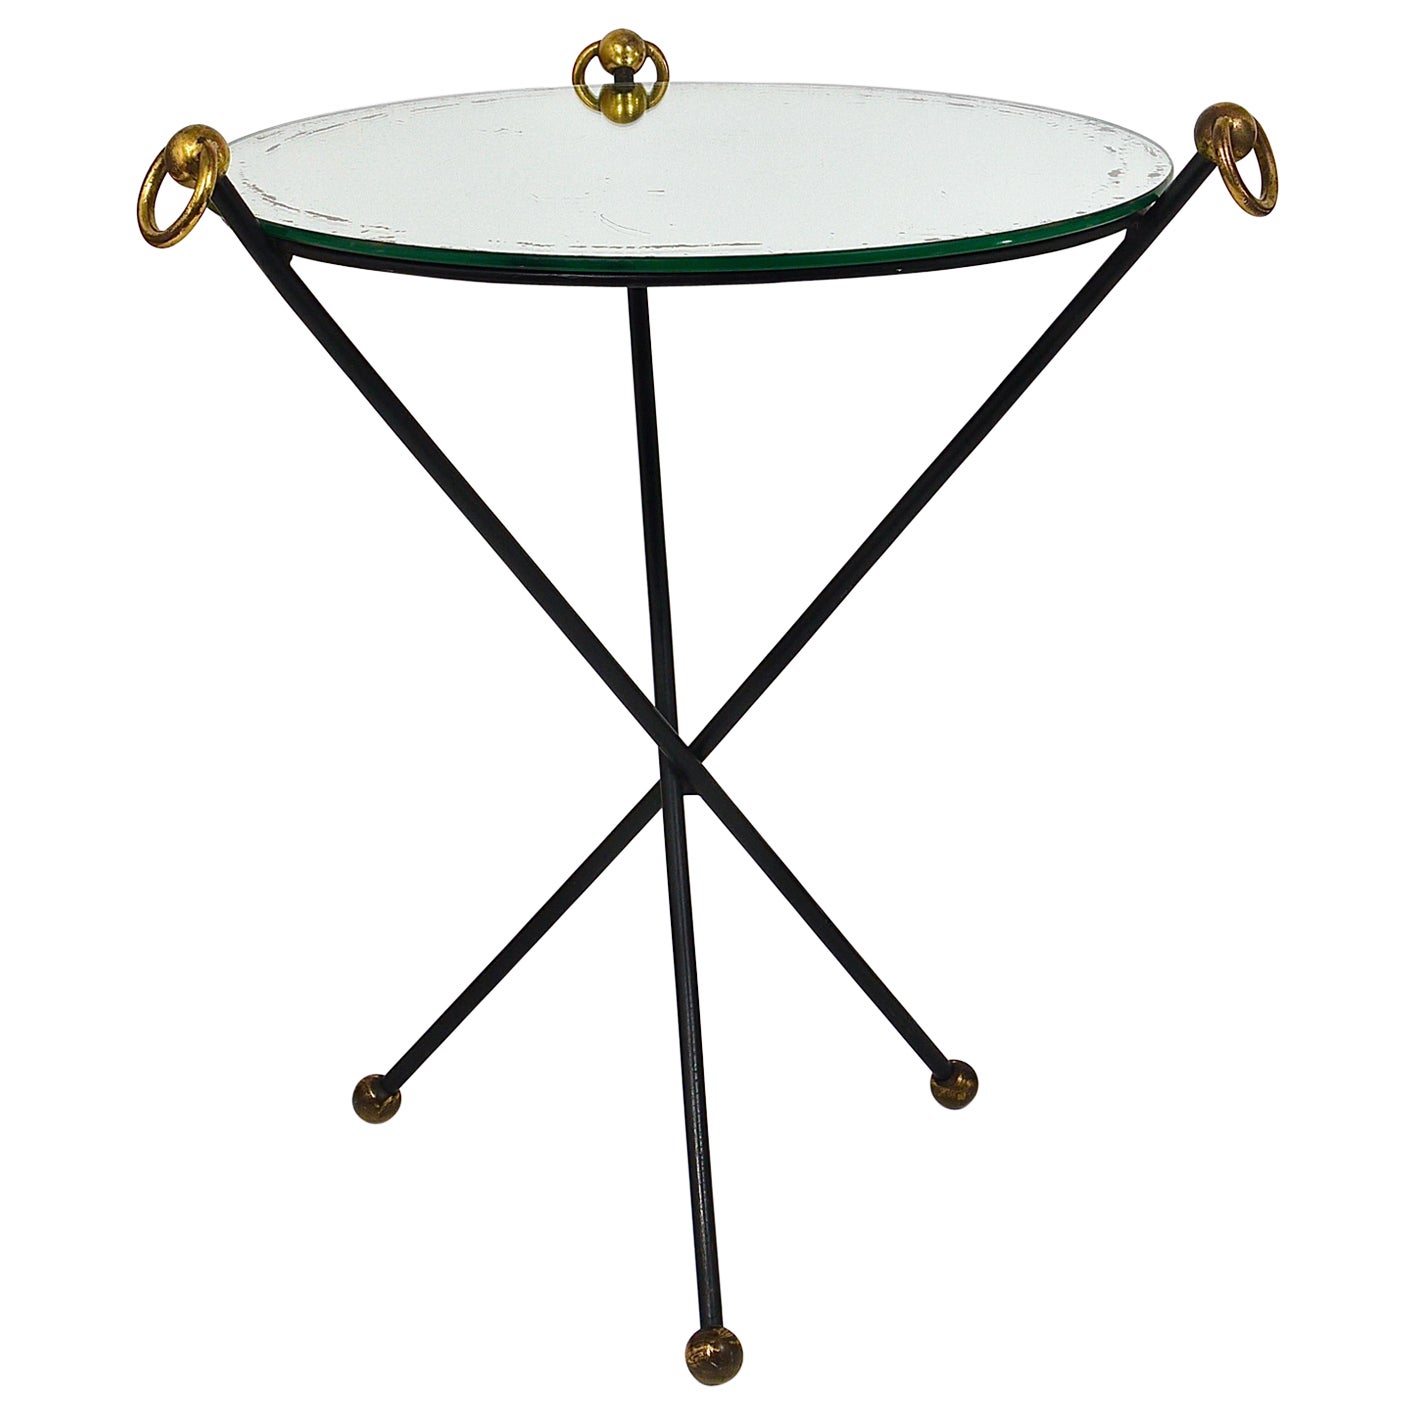 French Mid-Century Modern Mirror Side Table, Jacques Adnet Style, Brass, 1950s For Sale